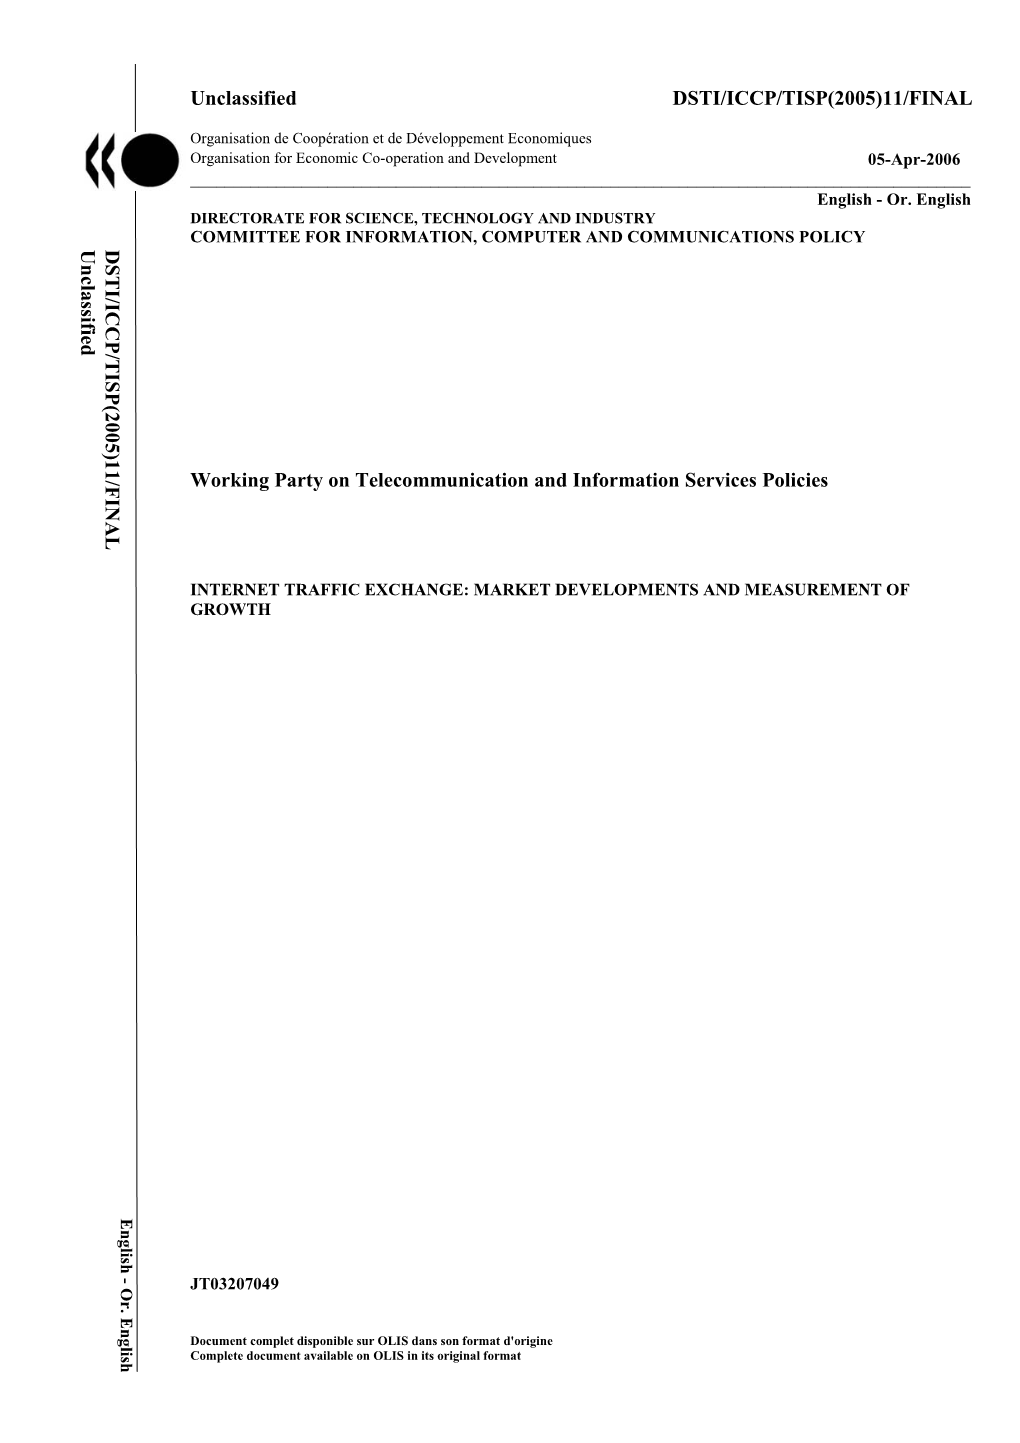 Unclassified DSTI/ICCP/TISP(2005)11/FINAL Working Party on Telecommunication and Information Services Policies DSTI/ICCP/TISP(20